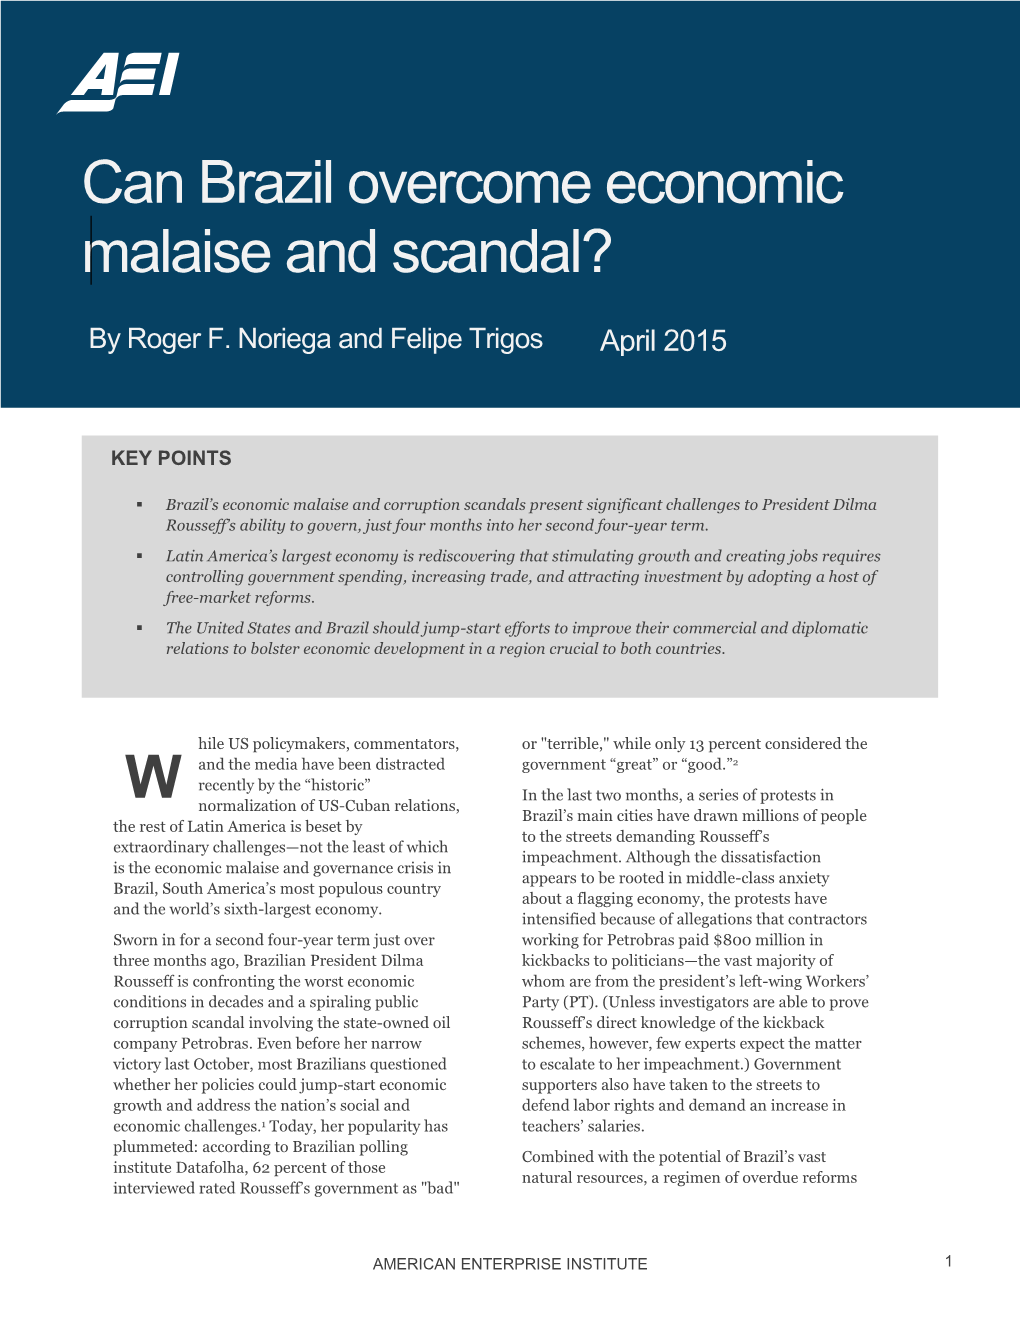 Can Brazil Overcome Economic Malaise and Scandal? W